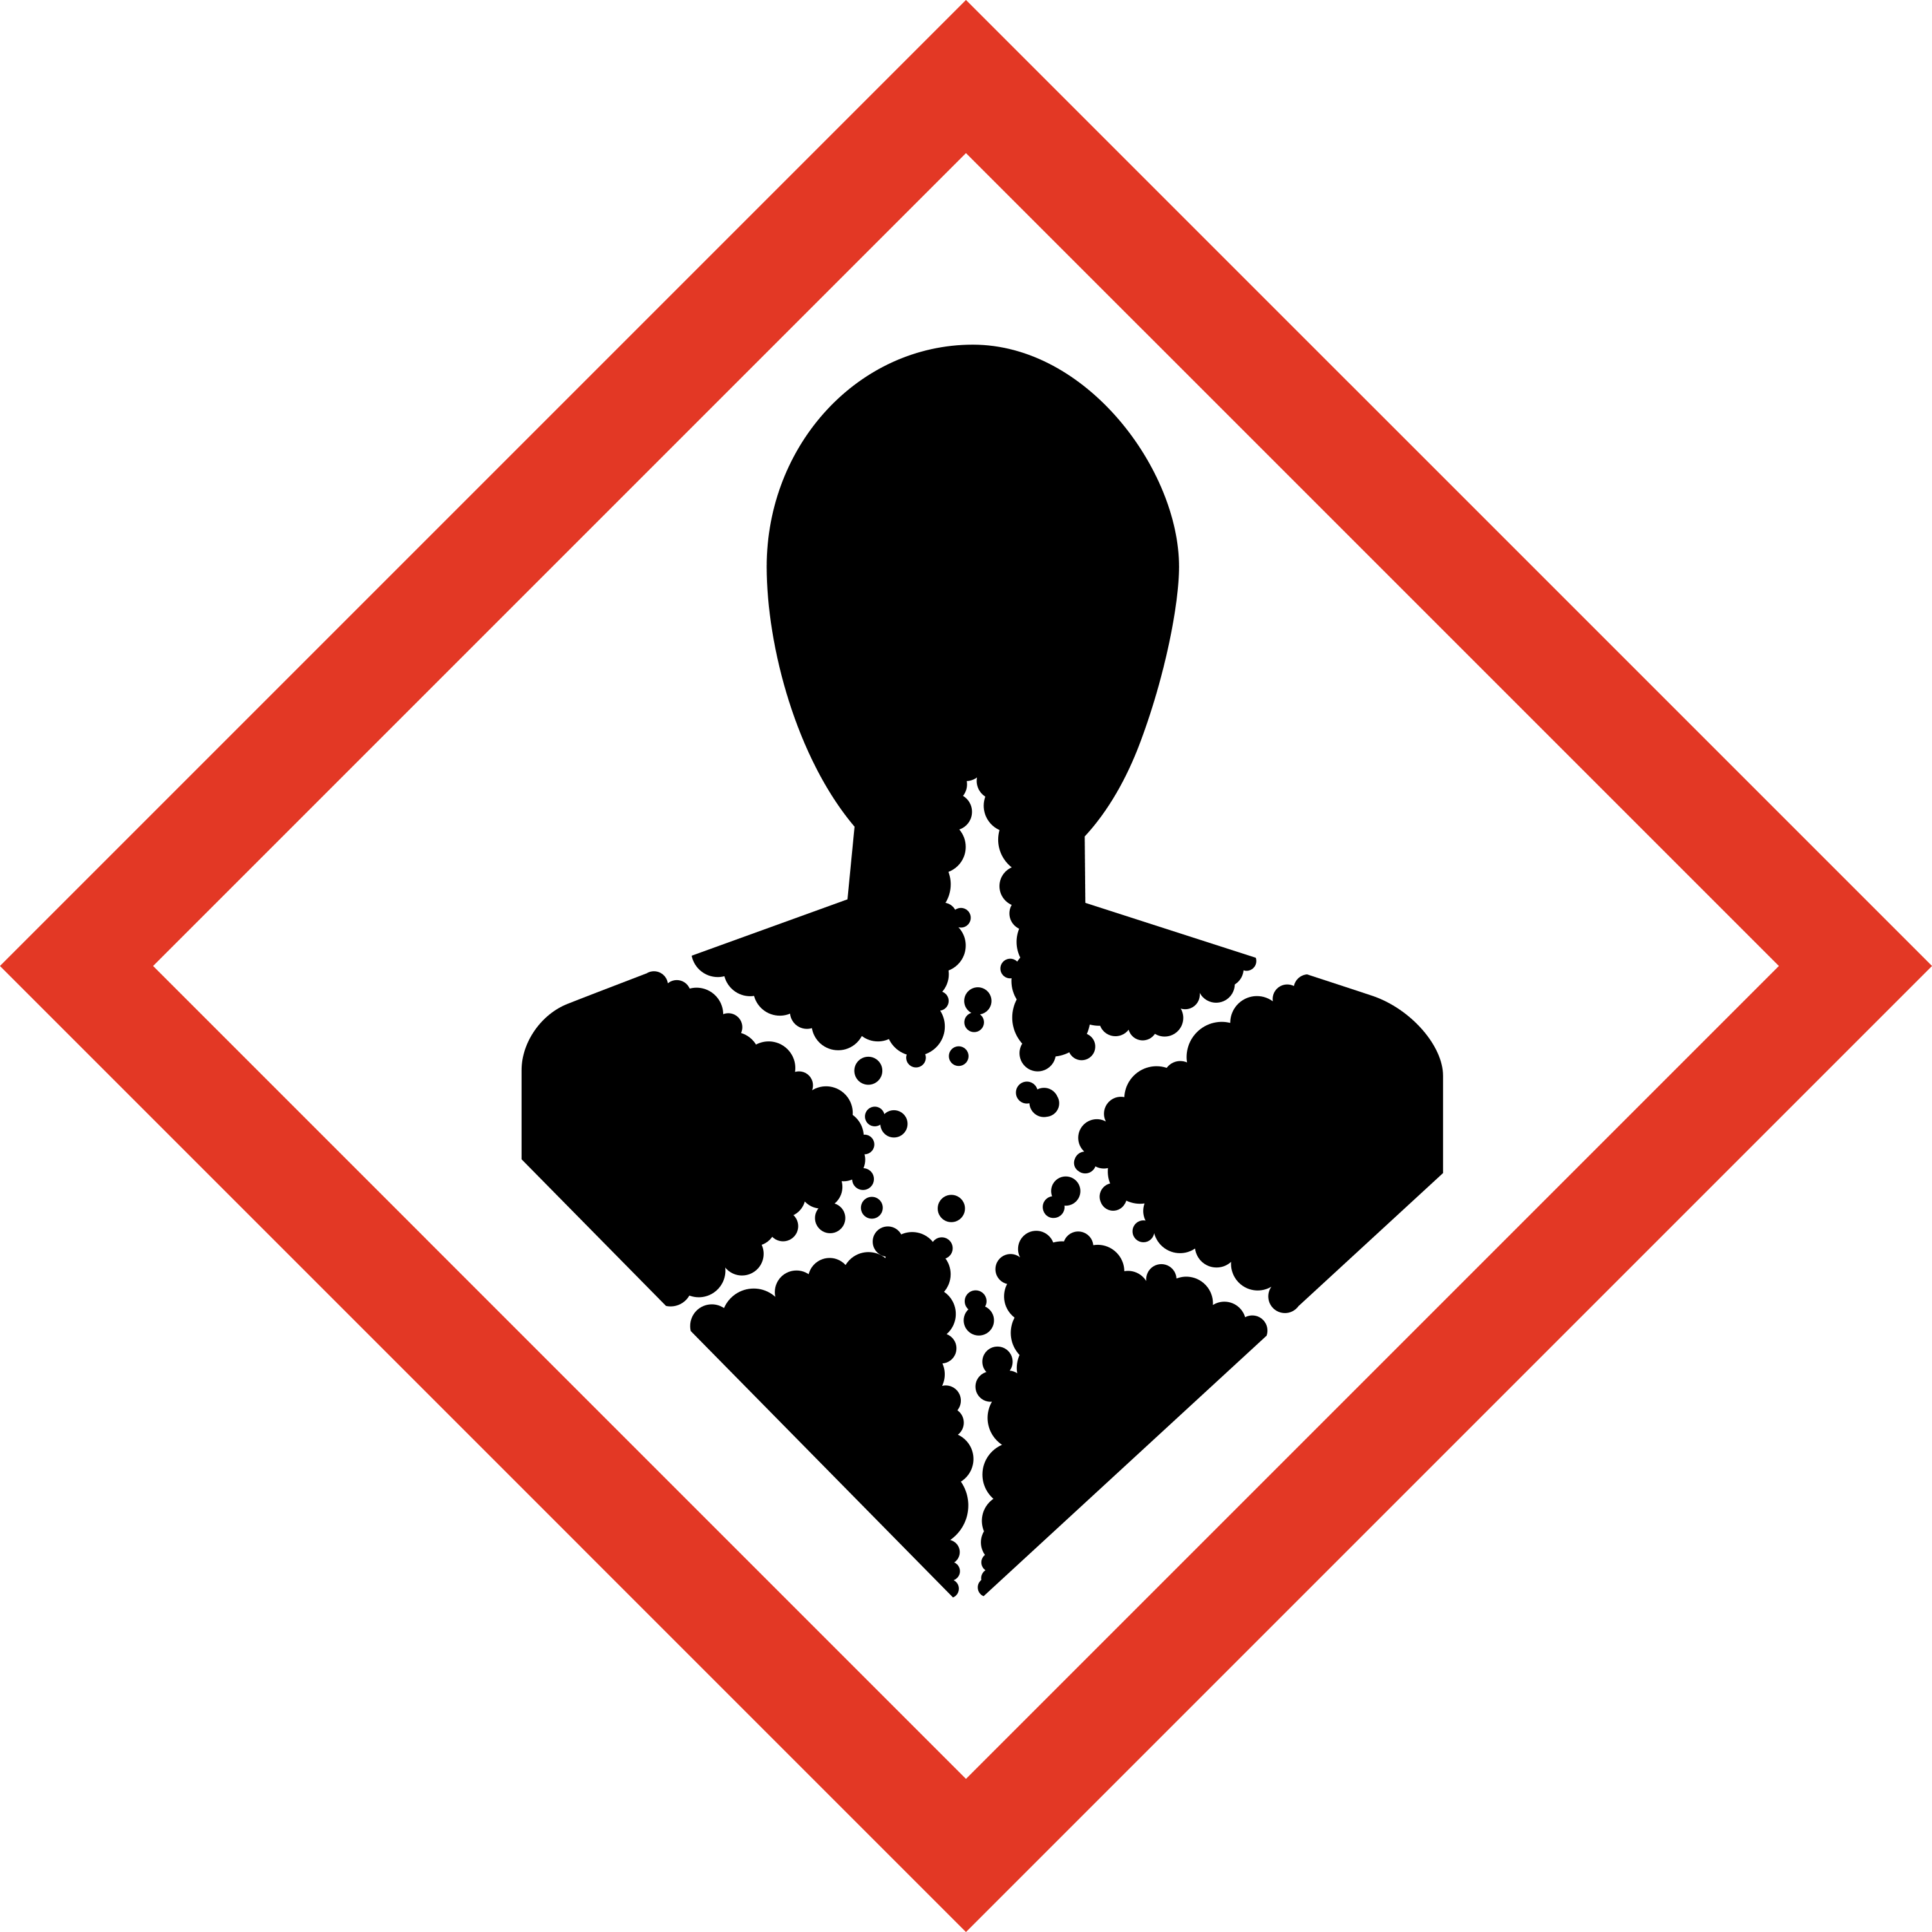 Pictogram Mutagenic, carcinogenic, reprotoxic or toxic to certain organs substances